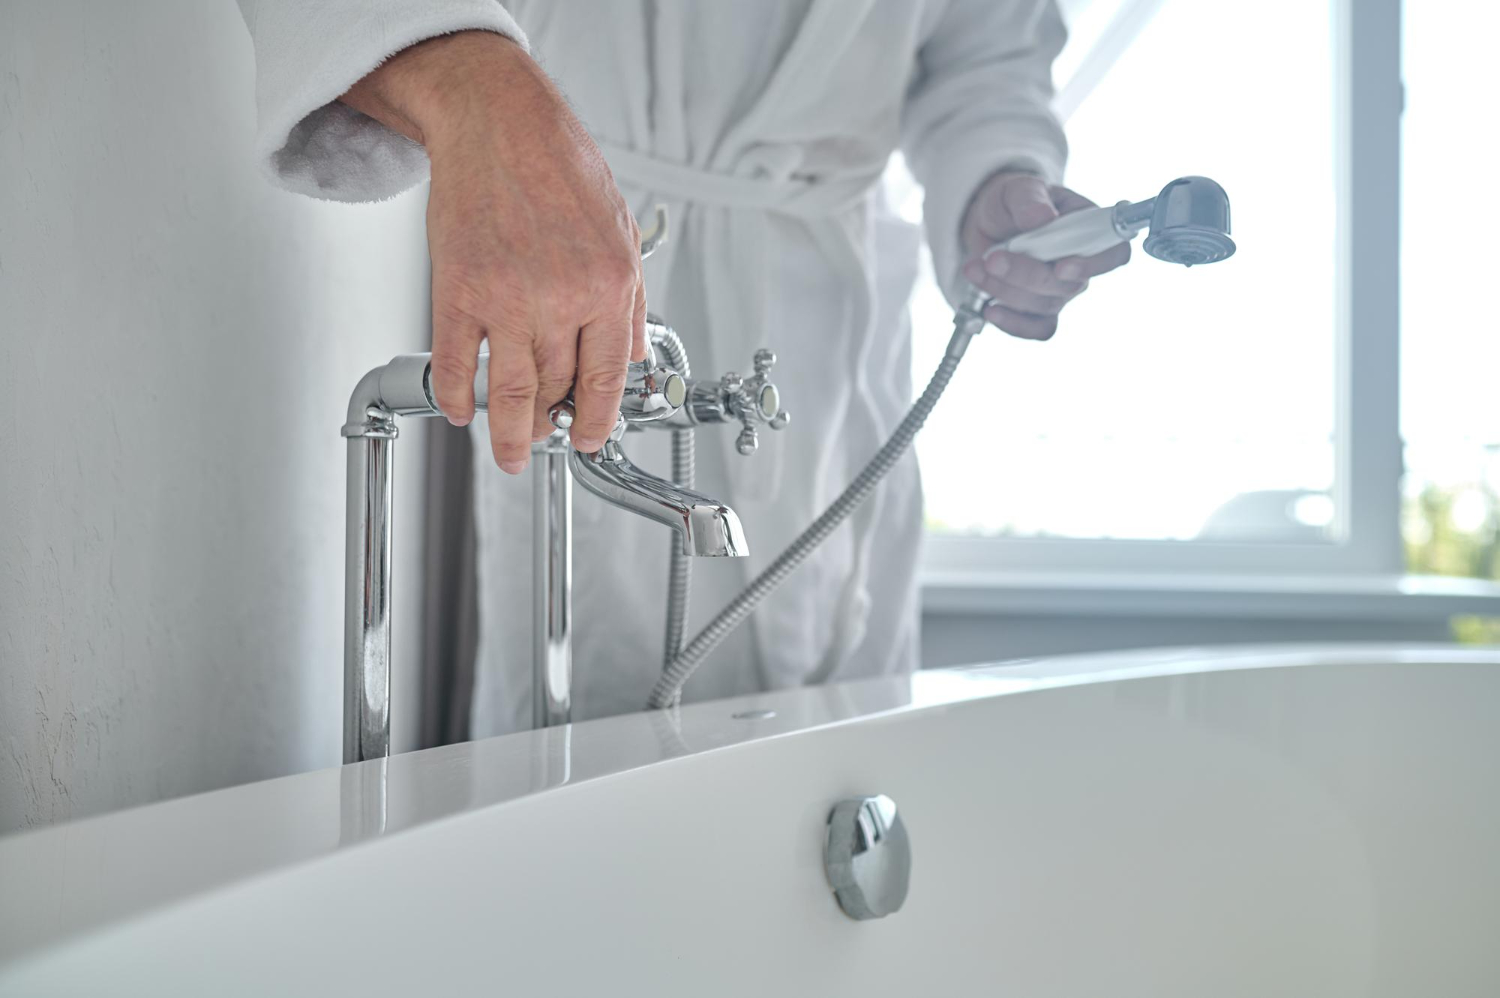 A man wearing a white bathrobe turns the handles of a bathtub faucet. He holds a detectable showerhead in his other hand.